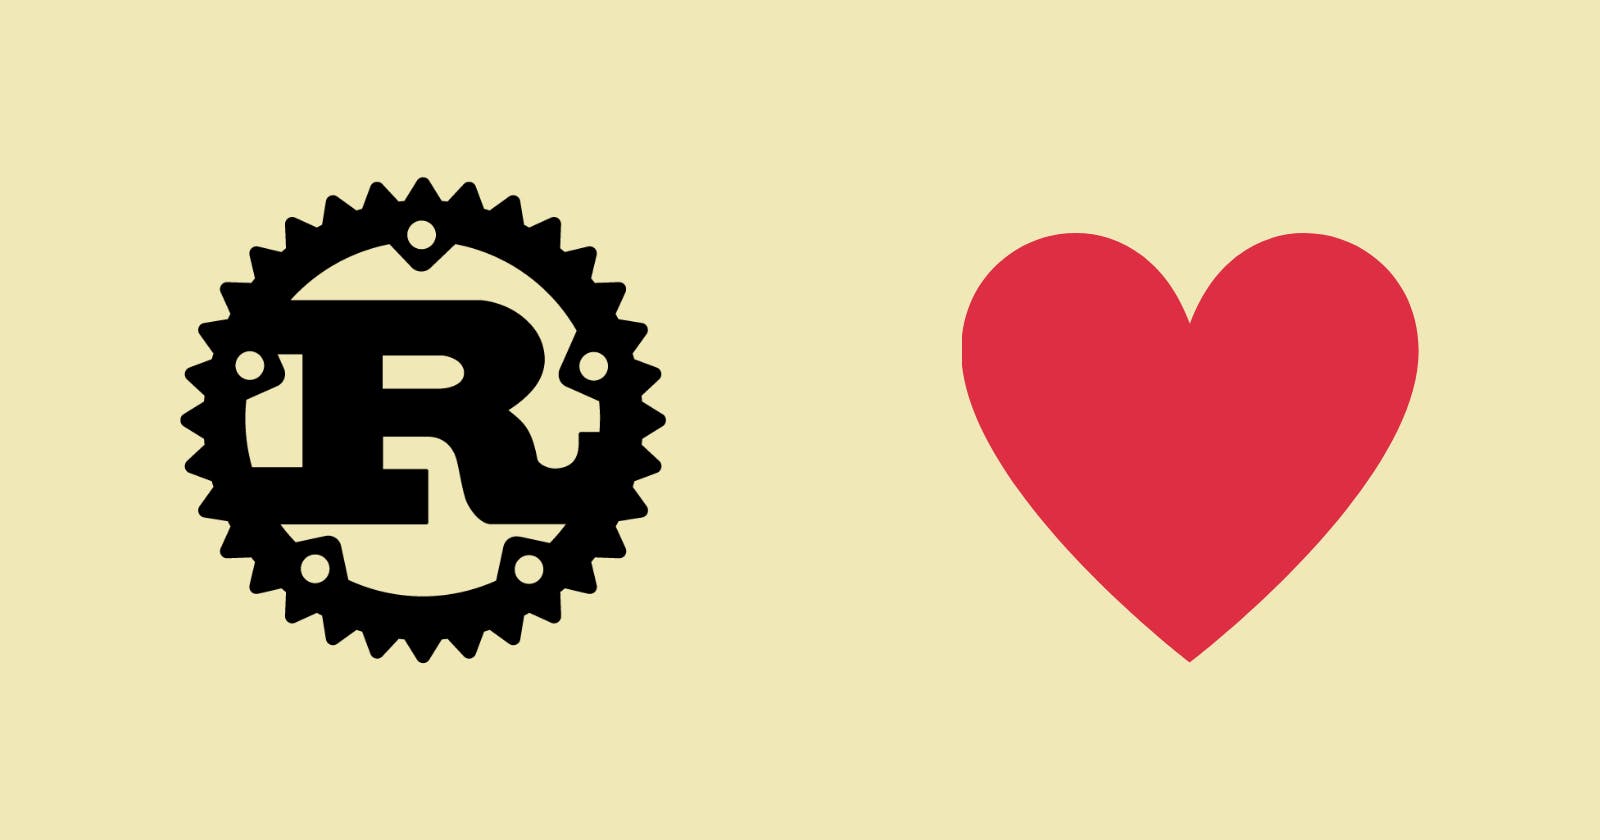 5 Things I Loved About Learning Rust